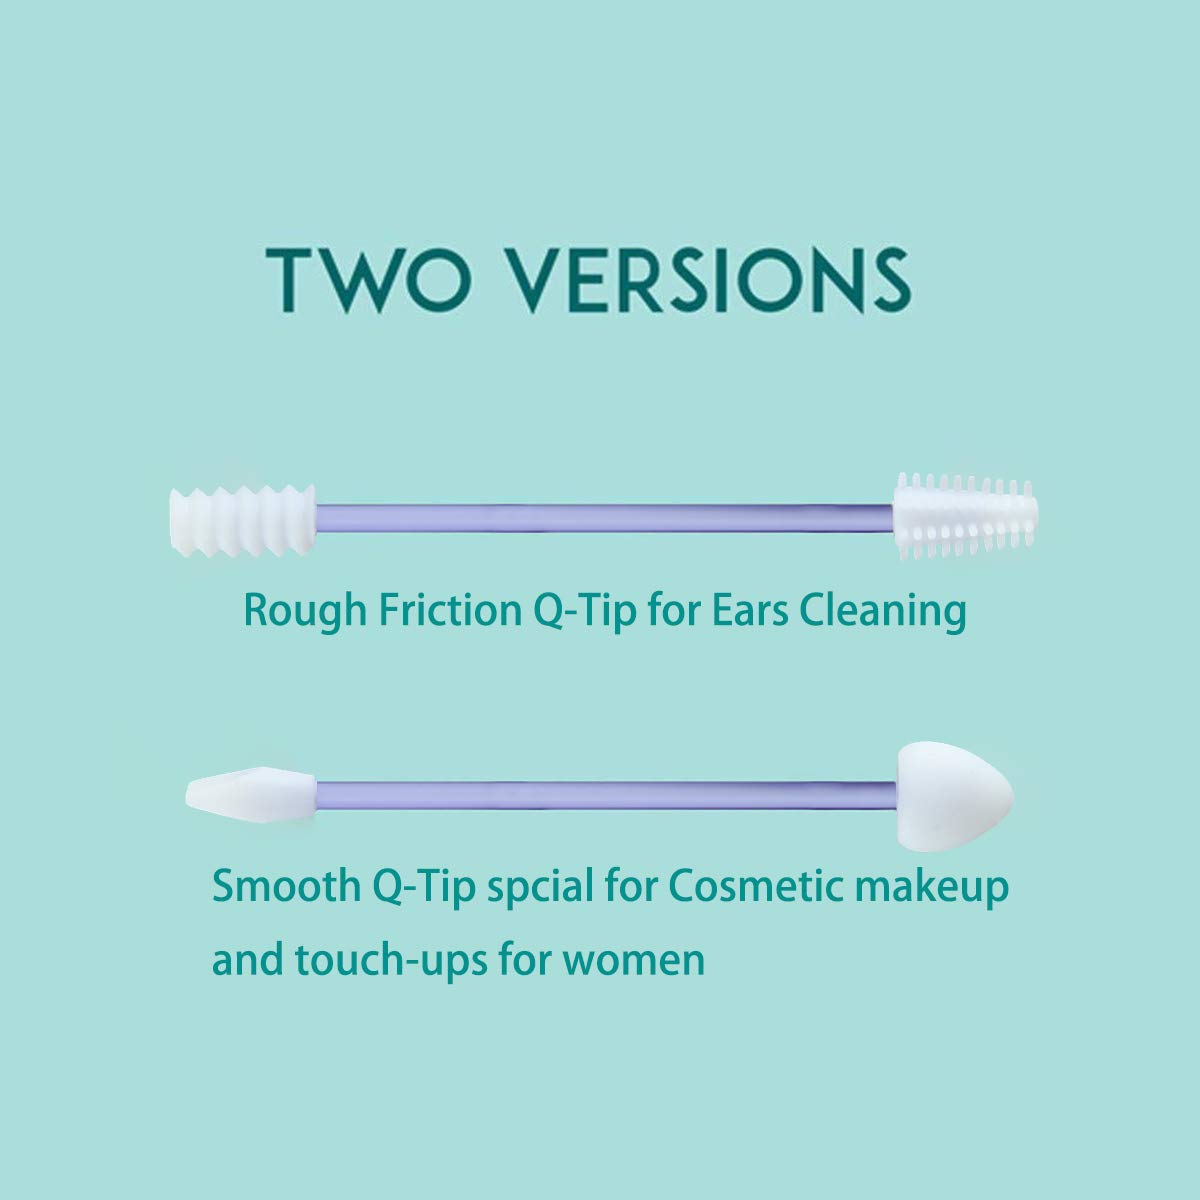 Rnker Reusable Medical Silicone Rough Friction Q-Tip for Ears Cleaning, Smooth Q-Tip for Makeup and Touch-ups for Women (2 in 1 pack, Deep Blue) Design Upgrade